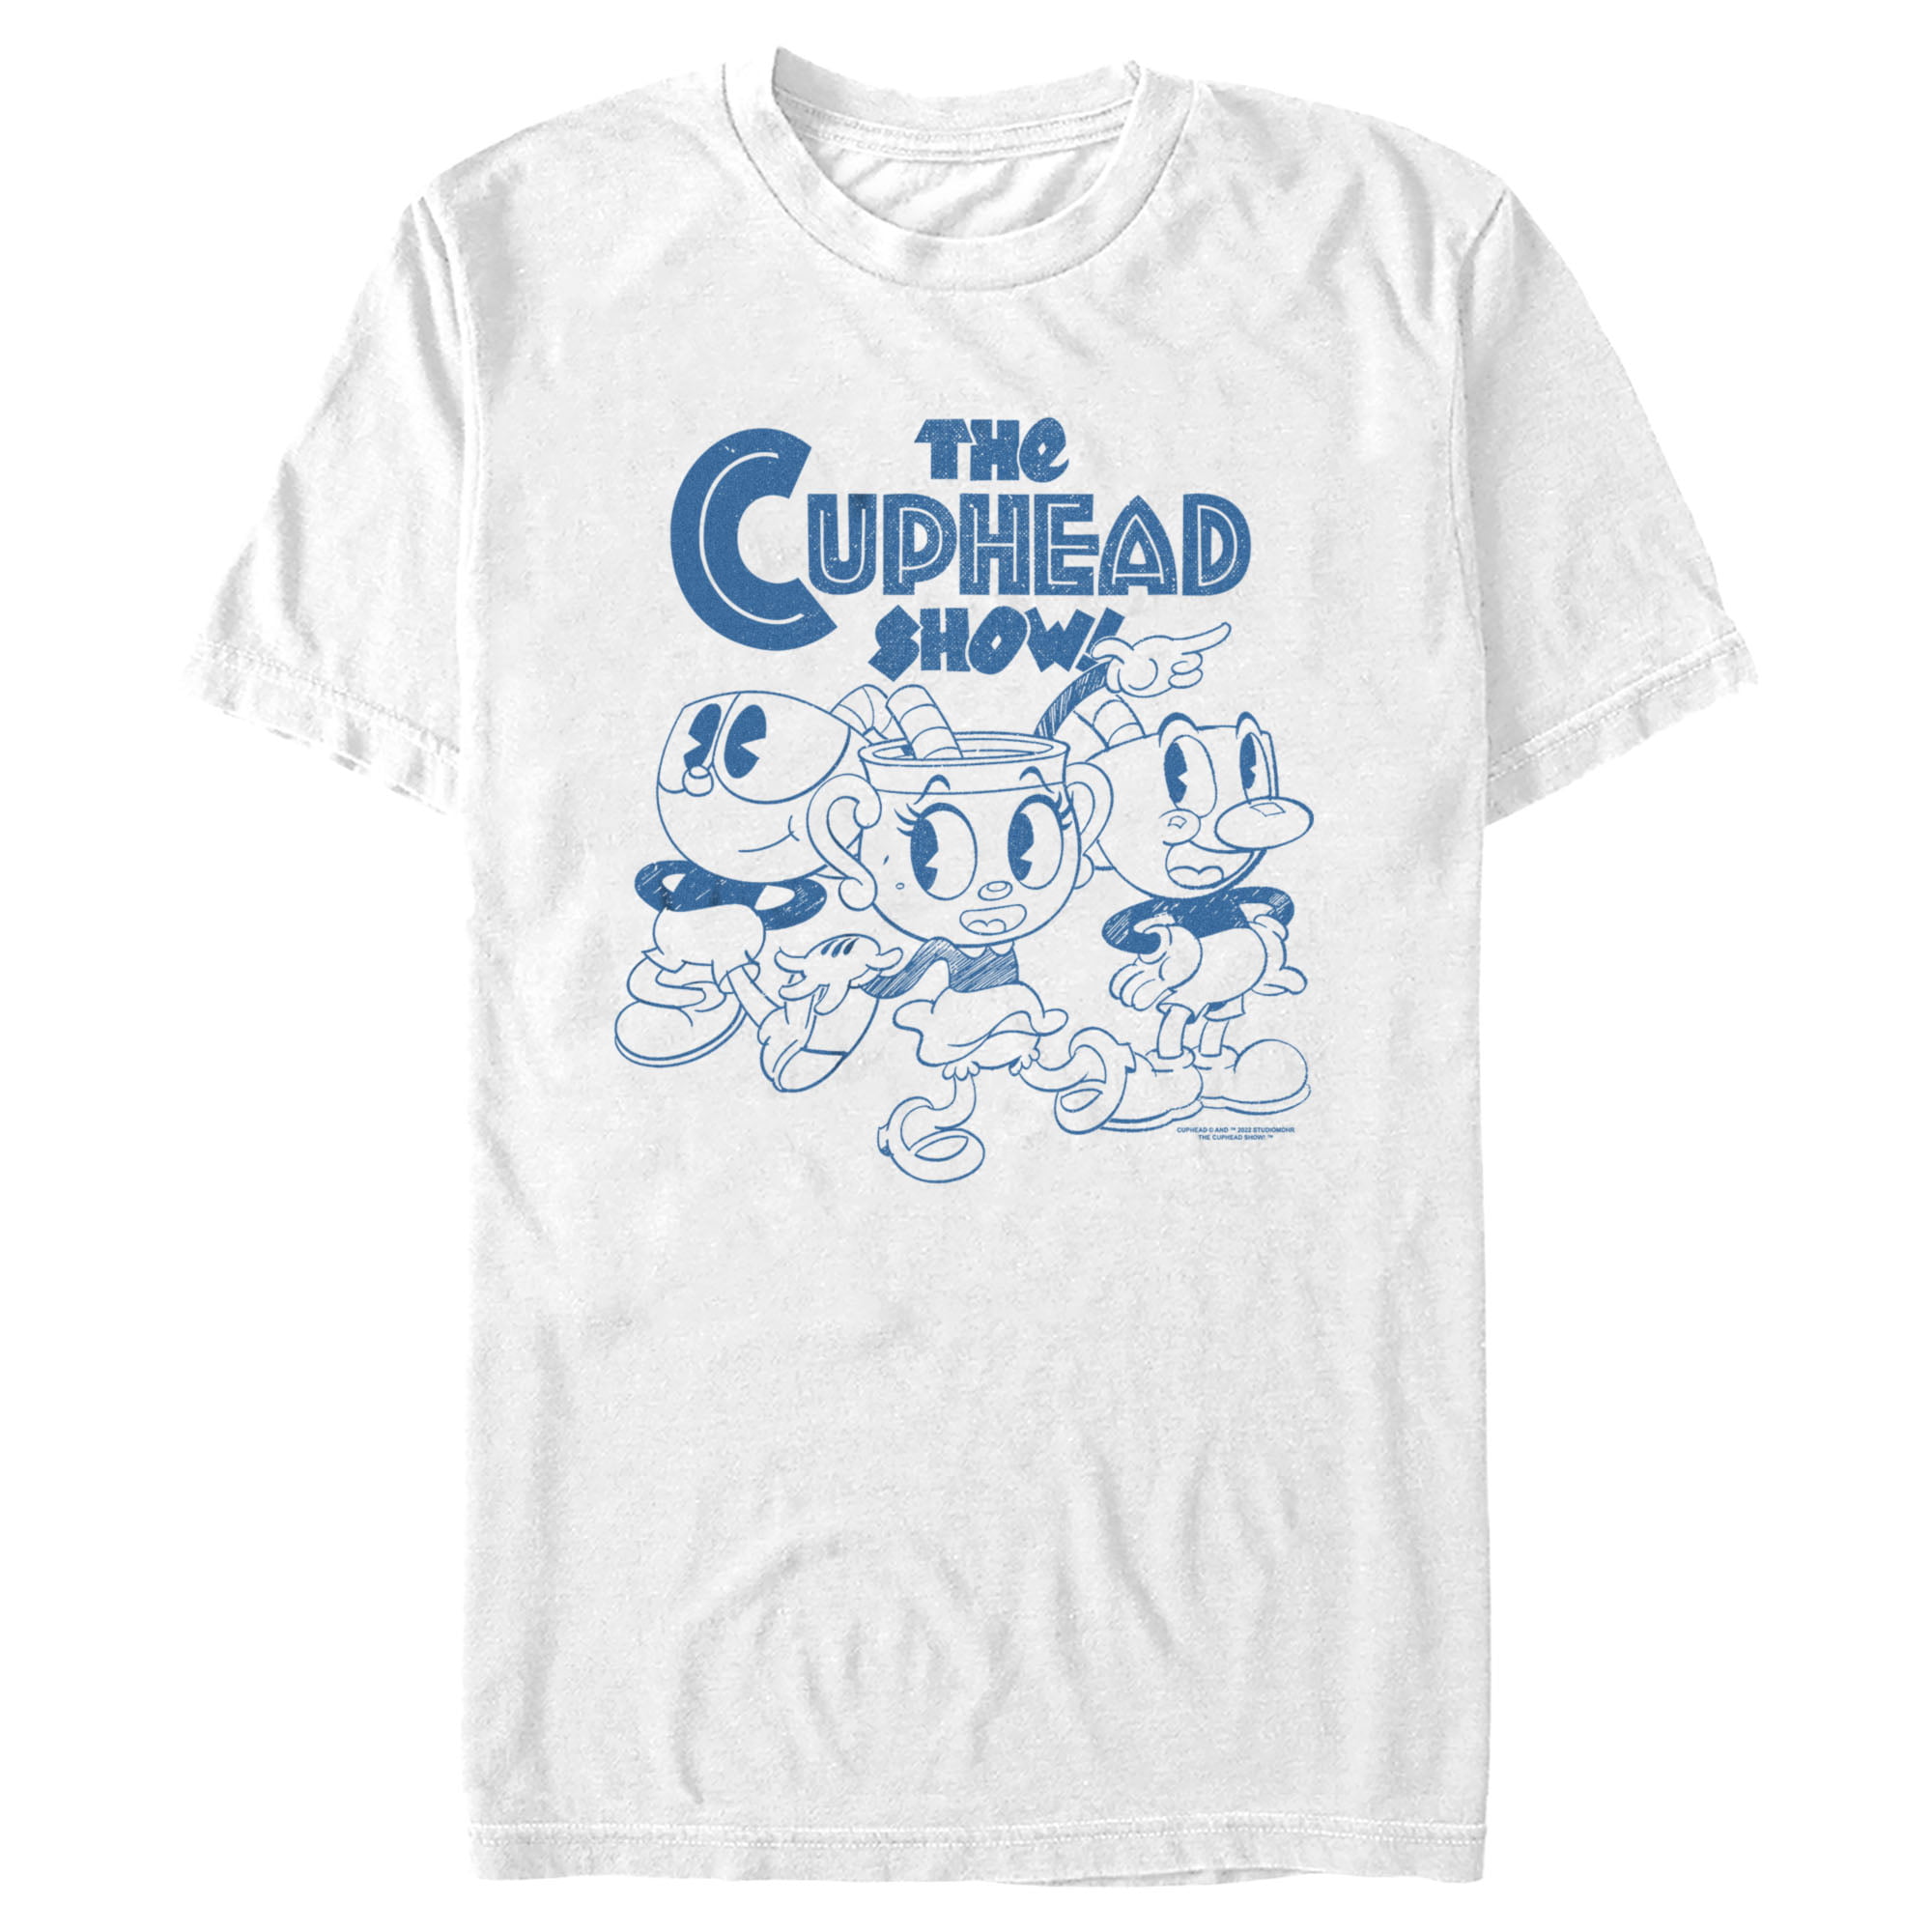 The Cuphead Show! Men's The Cuphead Show! Ms. Chalice Panels Graphic Tee